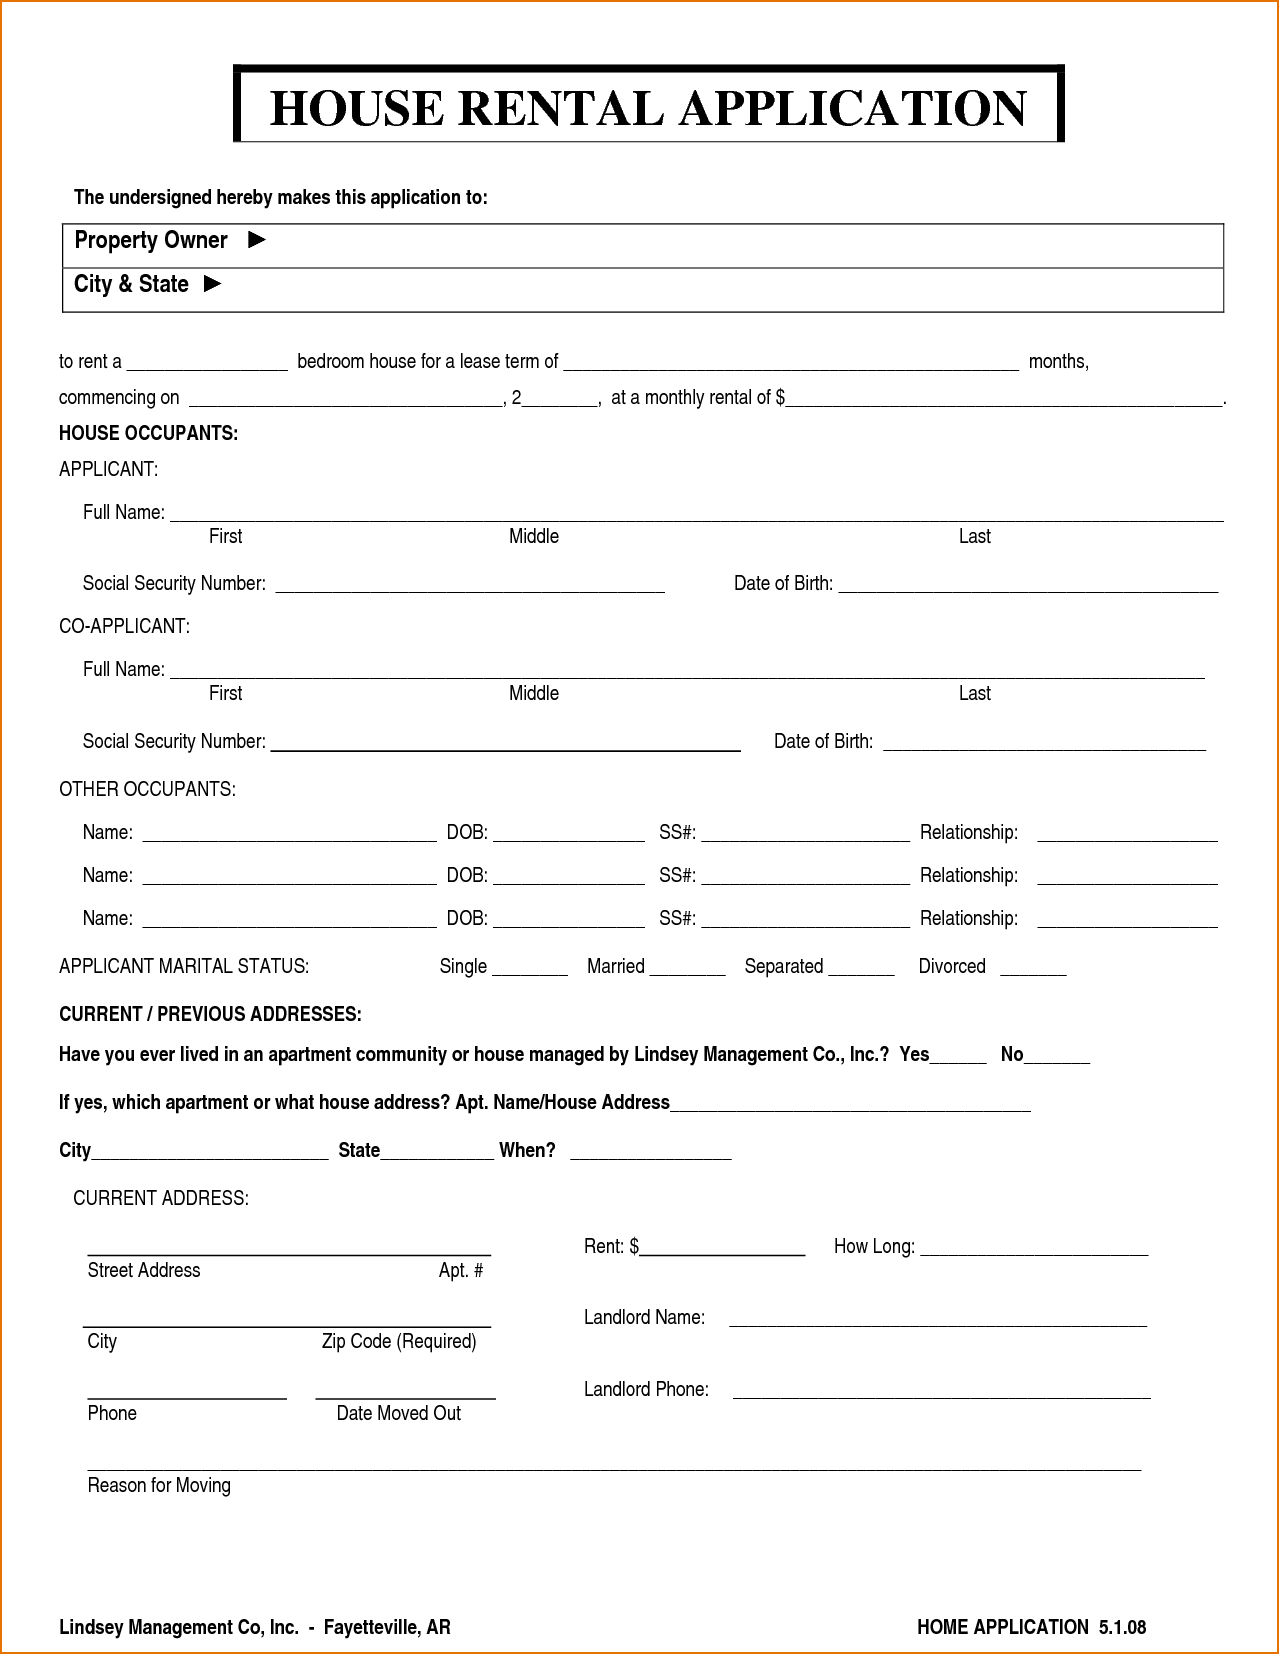 House rental application form powerful but rent – thathappymess.com